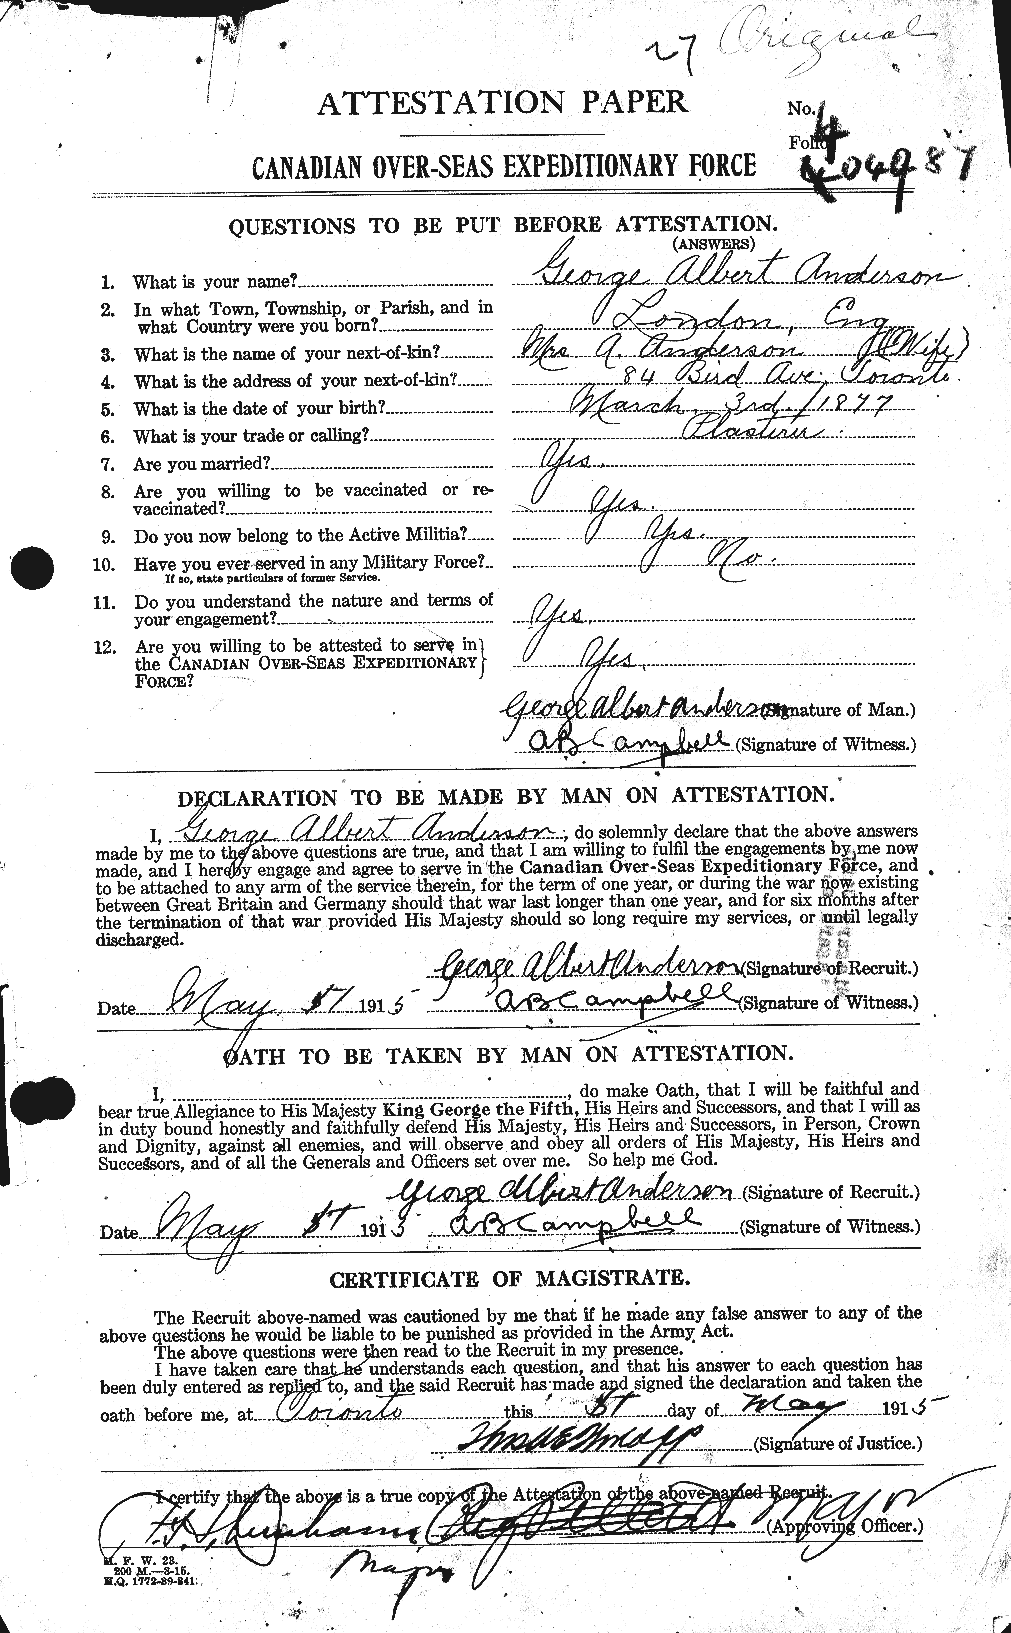 Personnel Records of the First World War - CEF 209745a